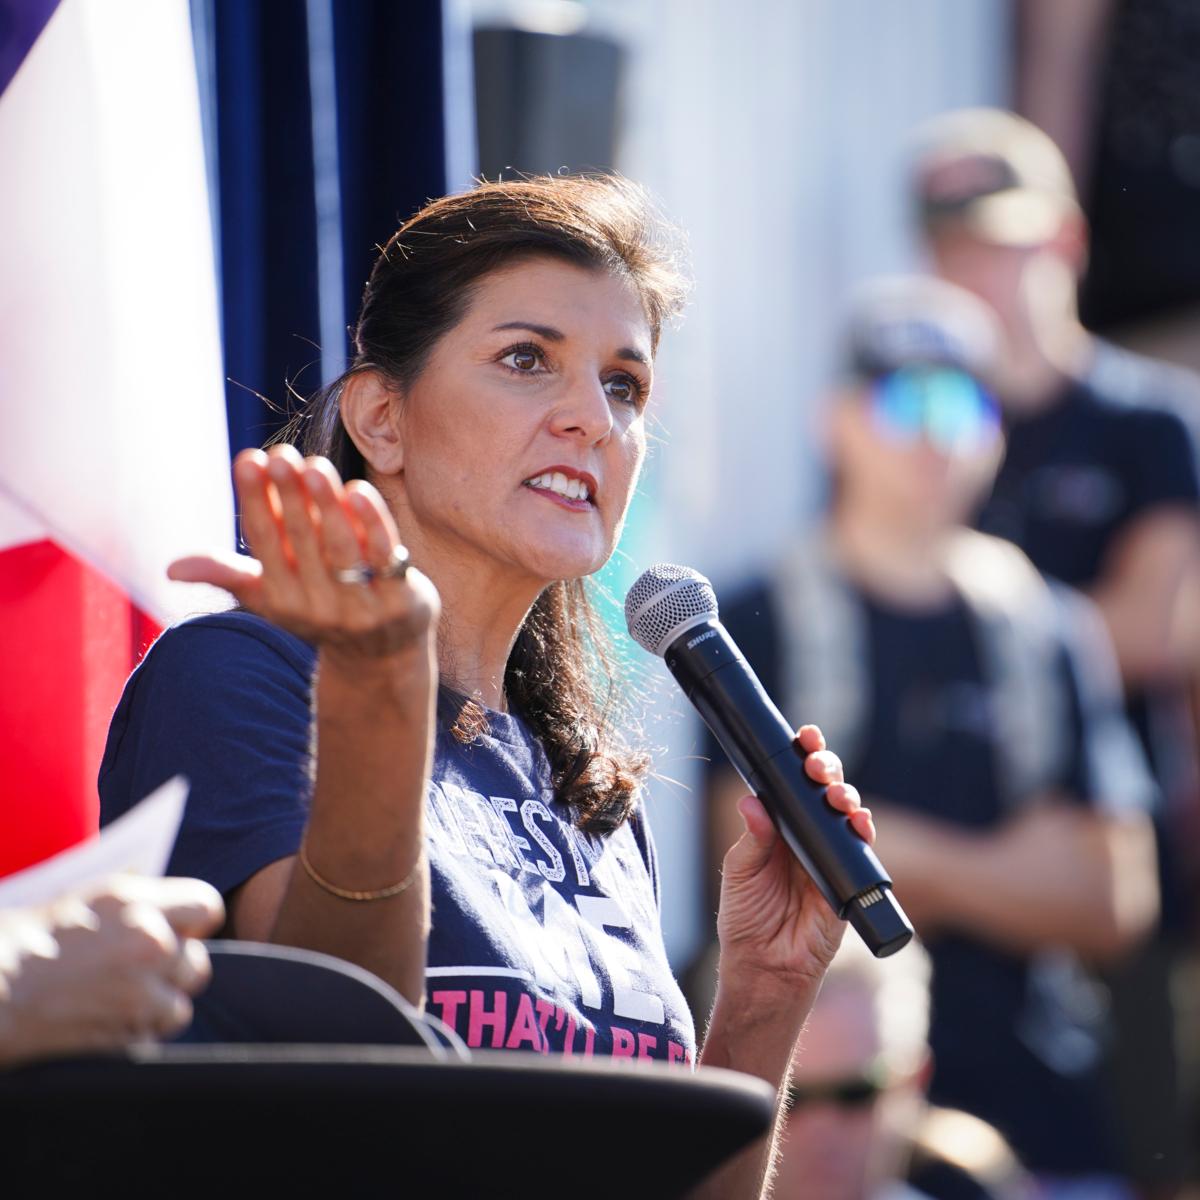 Republican presidential candidate and former South Carolina Gov. Nikki Haley speaks at the Iowa State Fair in Des Moines, Iowa, on Aug. 12, 2023. (Madalina Vasiliu/The Epoch Times)